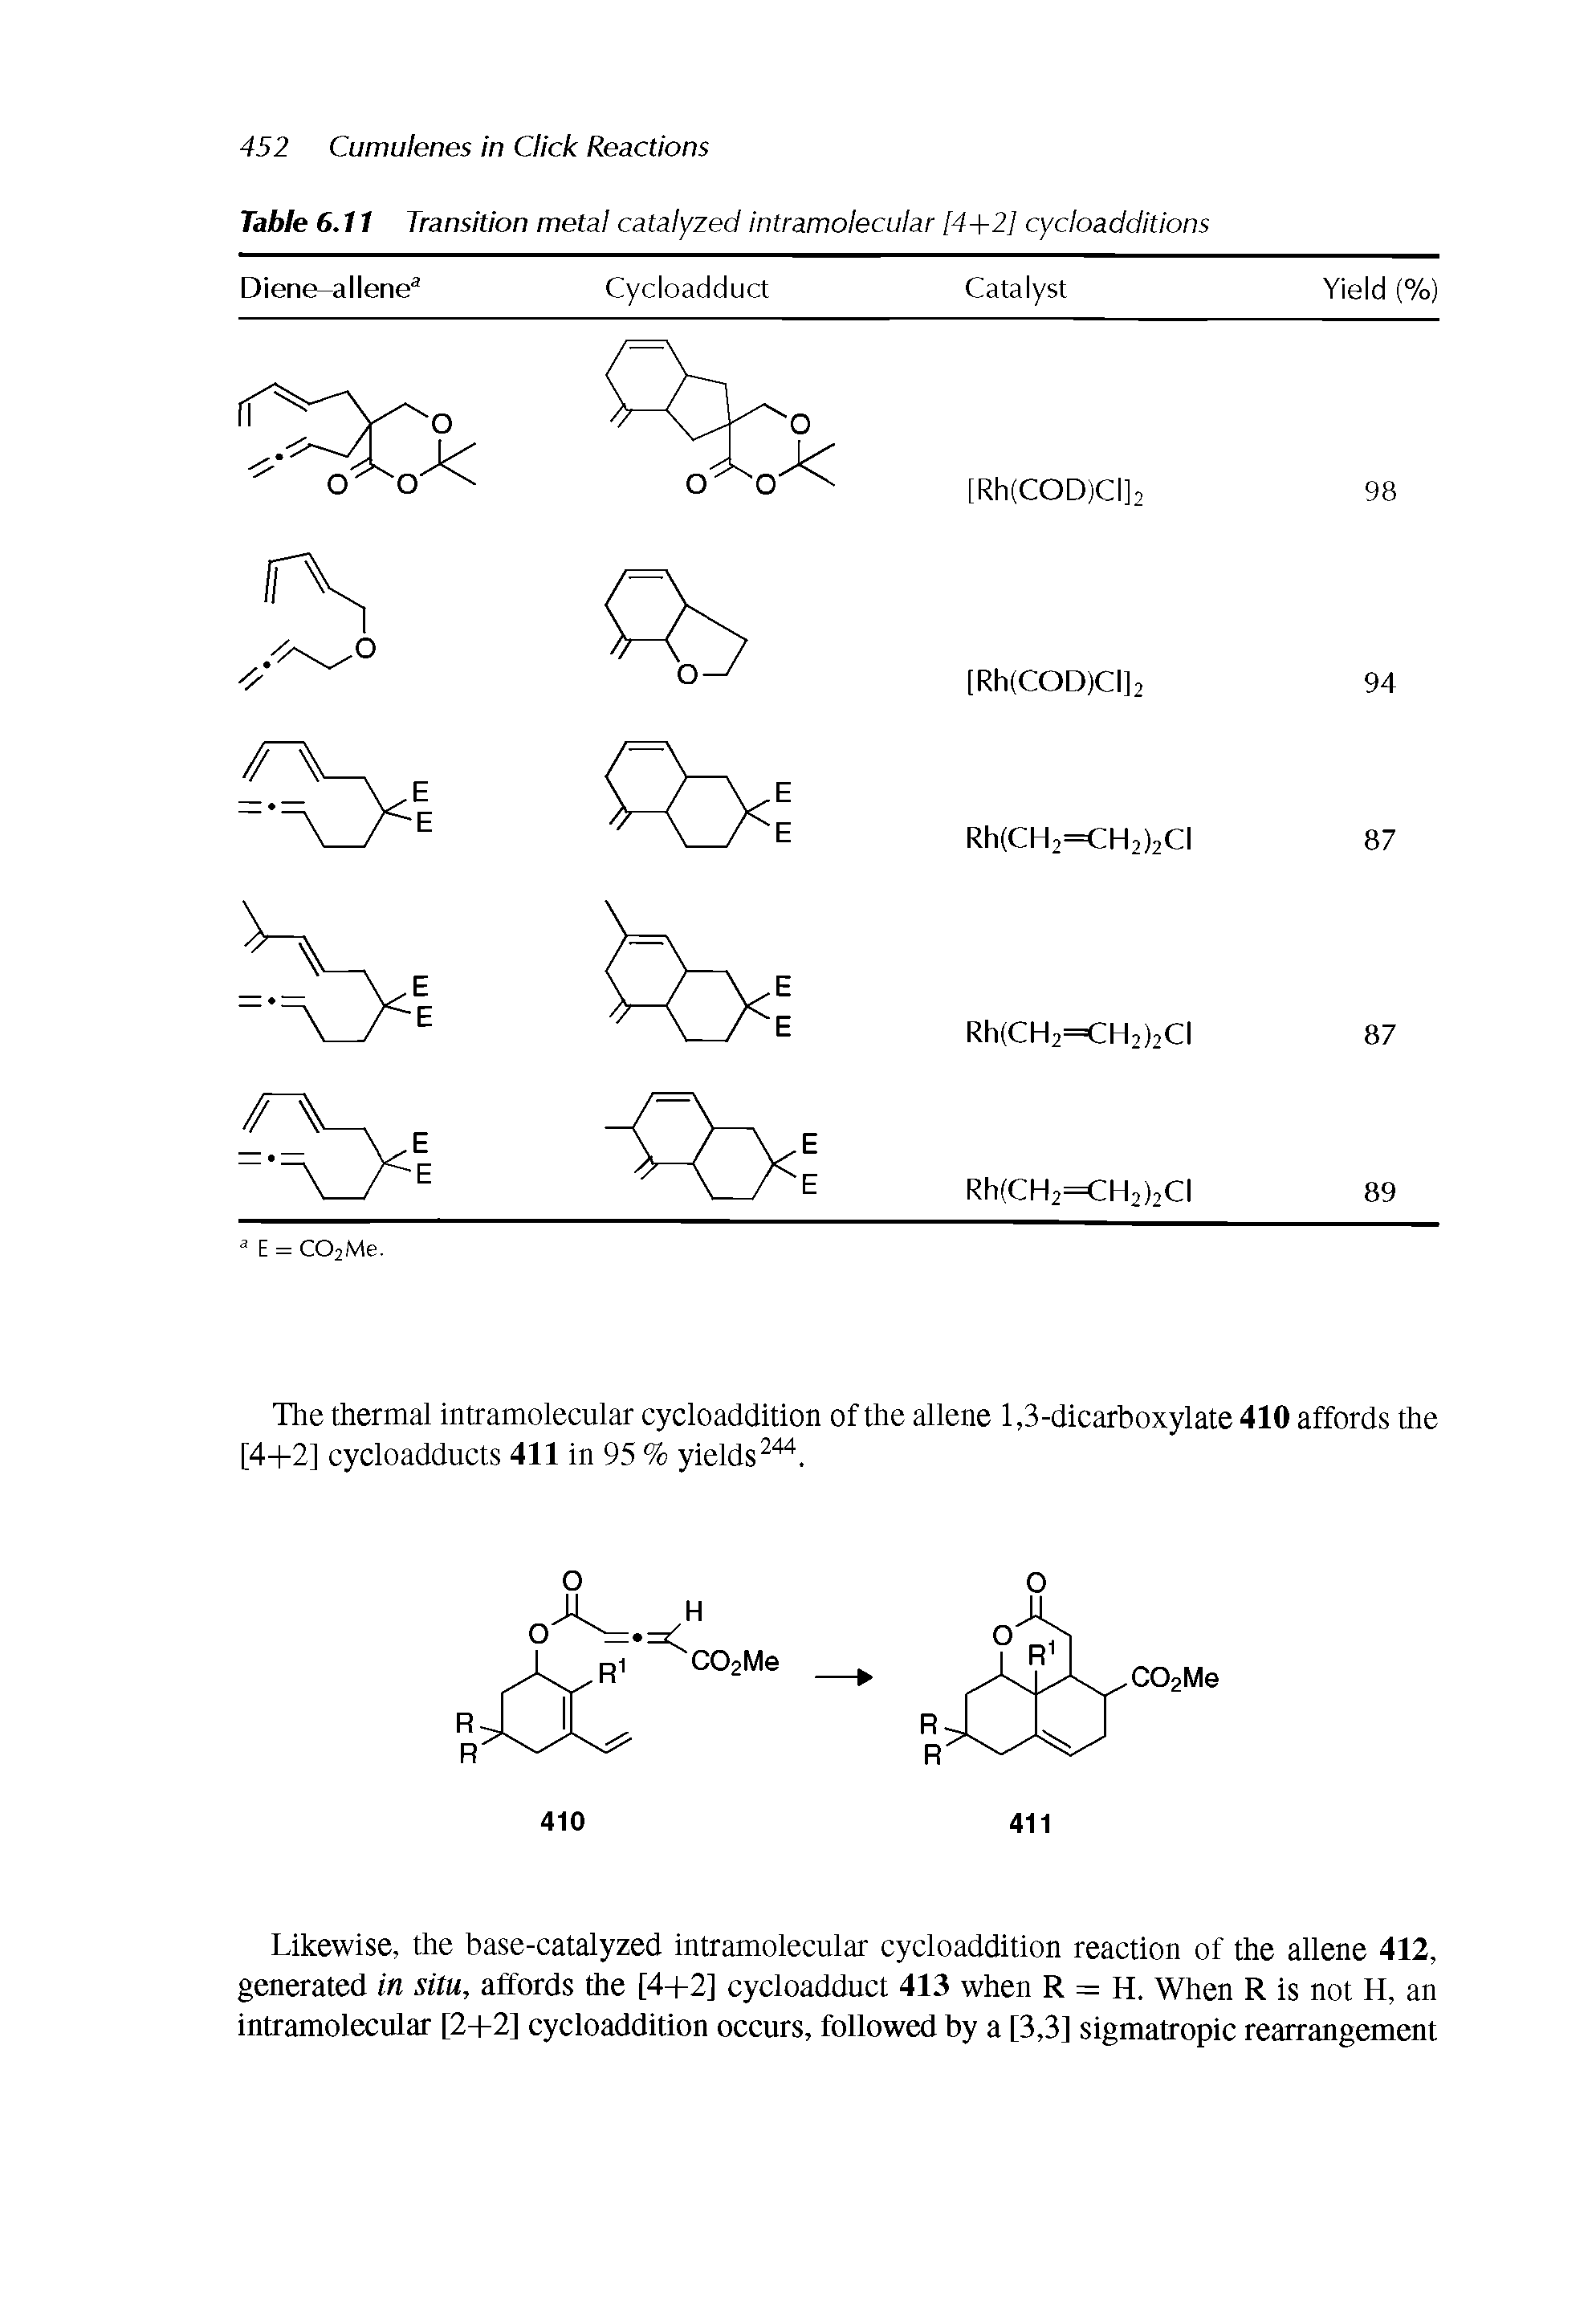 Table 6.11 Transition metal catalyzed intramolecular [4+2] cycloadditions...